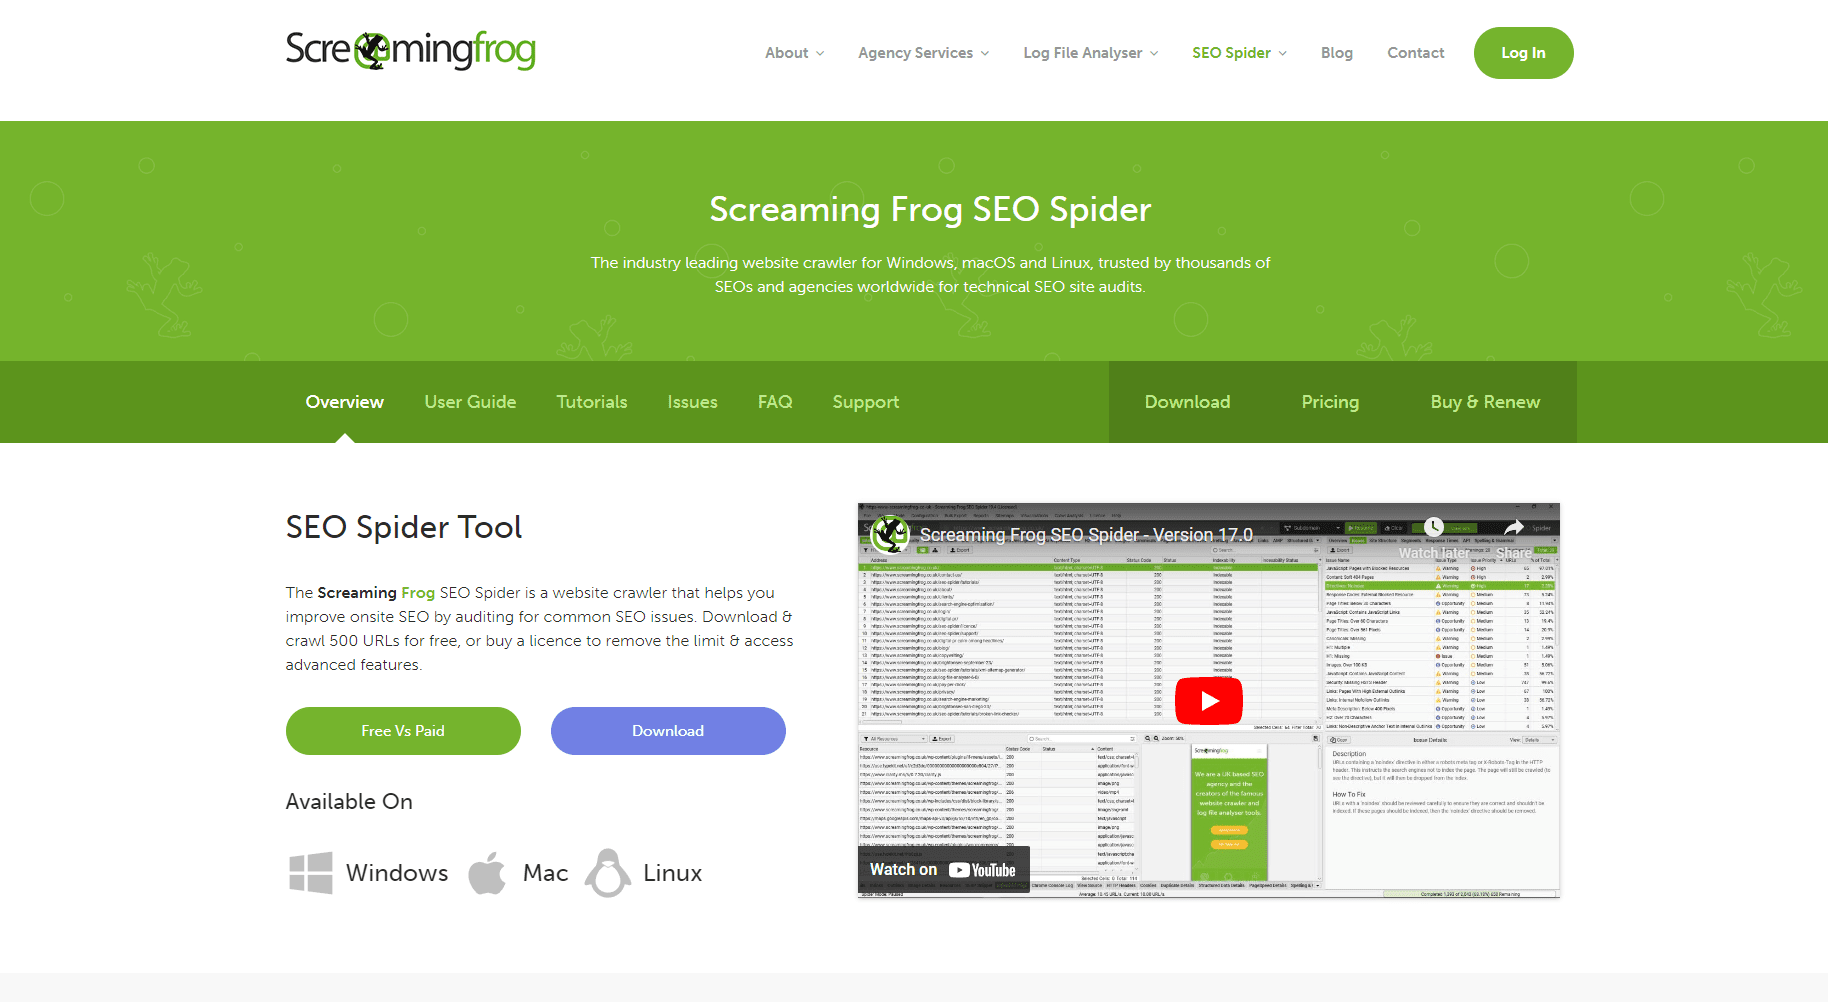 Screaming Frog main page